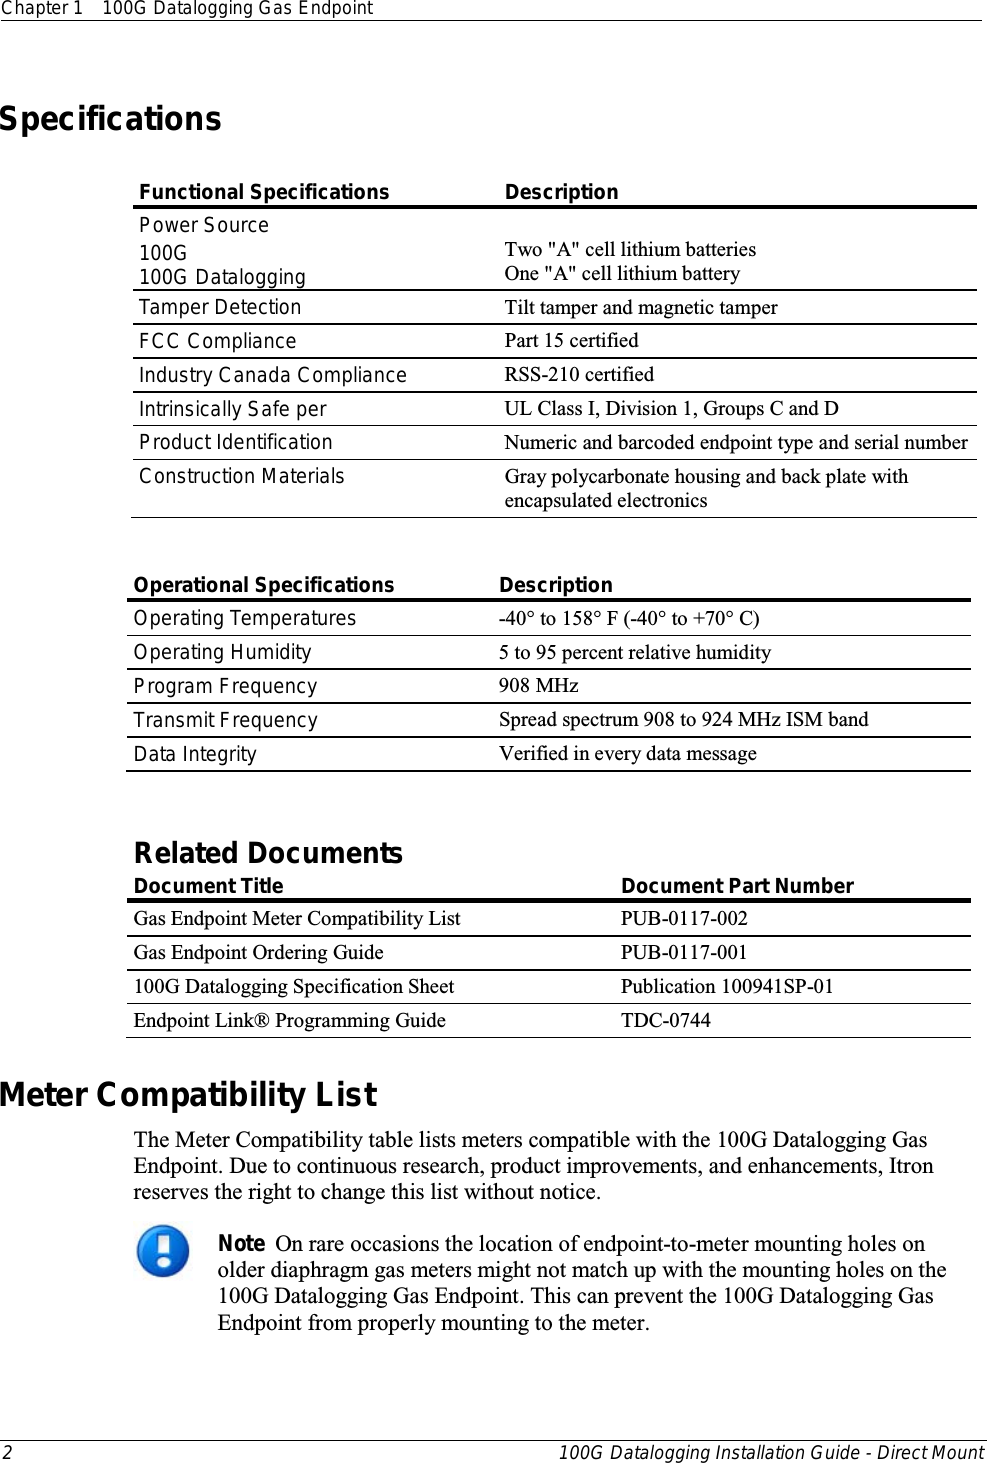 Chapter 1 100G Datalogging Gas Endpoint  2  100G Datalogging Installation Guide - Direct Mount  Specifications  Functional Specifications Description Power Source 100G 100G Datalogging  Two &quot;A&quot; cell lithium batteries One &quot;A&quot; cell lithium battery Tamper Detection Tilt tamper and magnetic tamper FCC Compliance Part 15 certified Industry Canada Compliance RSS-210 certified Intrinsically Safe per UL Class I, Division 1, Groups C and D Product Identification Numeric and barcoded endpoint type and serial number Construction Materials Gray polycarbonate housing and back plate with encapsulated electronics  Operational Specifications Description Operating Temperatures -40° to 158° F (-40° to +70° C) Operating Humidity 5 to 95 percent relative humidity Program Frequency 908 MHz Transmit Frequency Spread spectrum 908 to 924 MHz ISM band Data Integrity Verified in every data message     Related Documents Document Title Document Part Number Gas Endpoint Meter Compatibility List PUB-0117-002 Gas Endpoint Ordering Guide  PUB-0117-001 100G Datalogging Specification Sheet Publication 100941SP-01 Endpoint Link® Programming Guide TDC-0744 Meter Compatibility List The Meter Compatibility table lists meters compatible with the 100G Datalogging Gas Endpoint. Due to continuous research, product improvements, and enhancements, Itron reserves the right to change this list without notice.  Note  On rare occasions the location of endpoint-to-meter mounting holes on older diaphragm gas meters might not match up with the mounting holes on the 100G Datalogging Gas Endpoint. This can prevent the 100G Datalogging Gas Endpoint from properly mounting to the meter. 